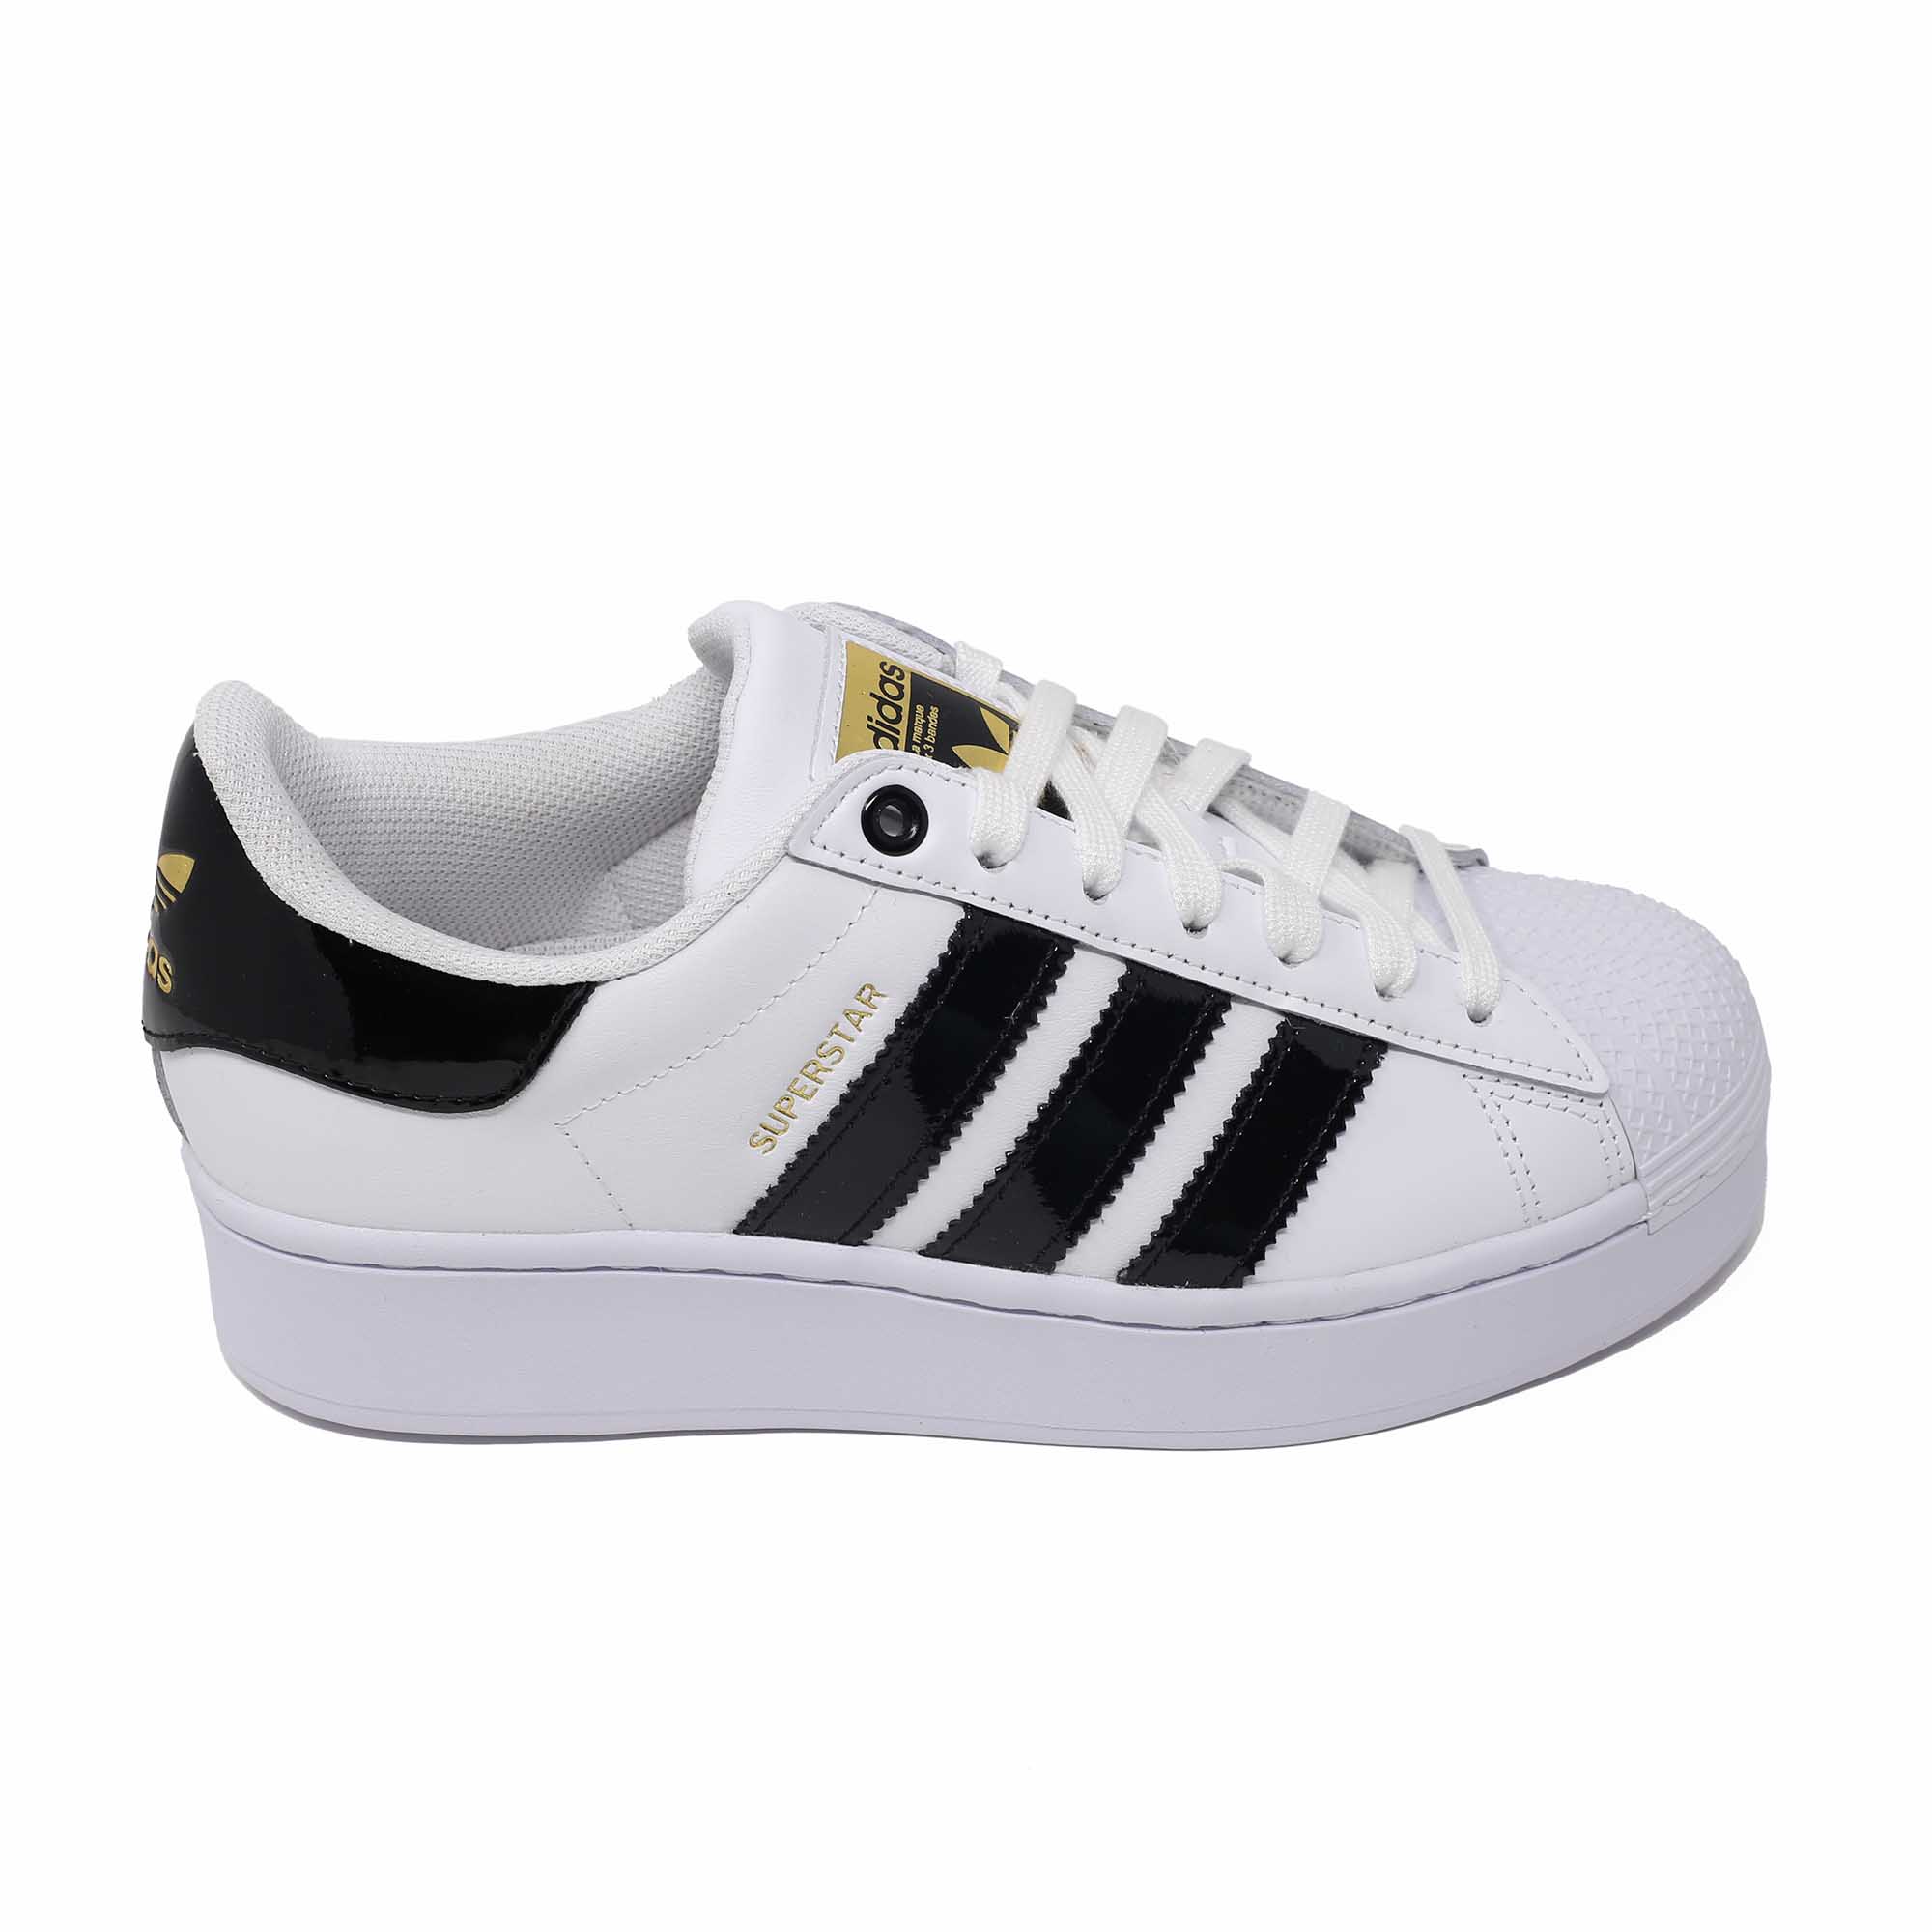 Excursion calorie Th SNEAKERS ADIDAS SUPERSTAR BOLD W BIANCO